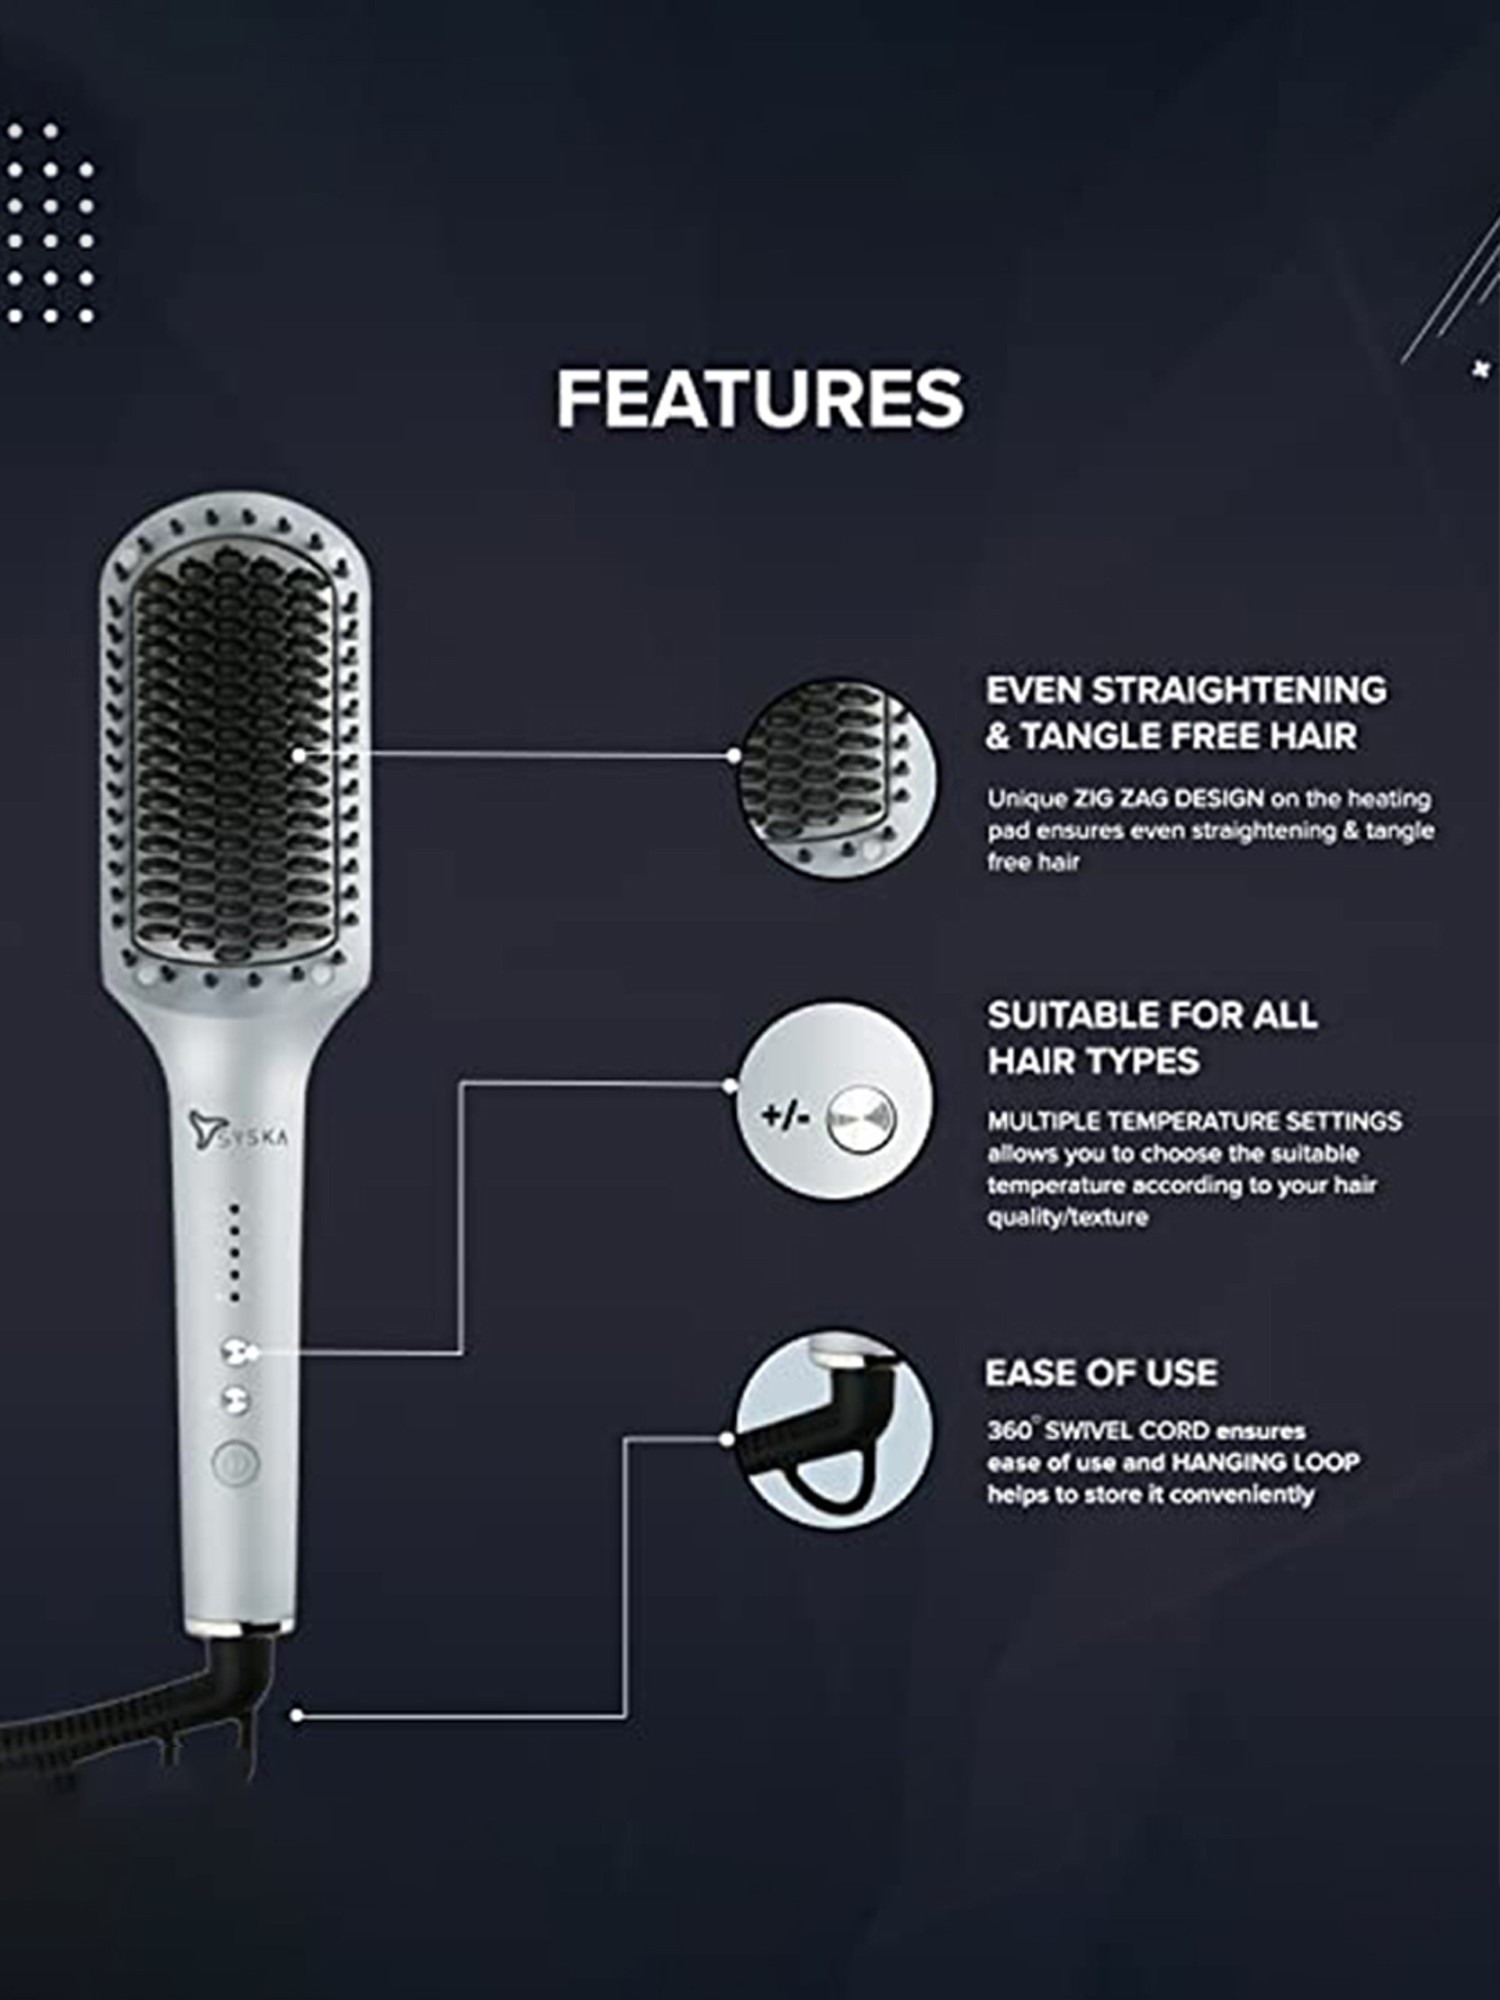 Syska HBS300 Salon Finish Hair Straightening Brush for Women with Ceramic  Tourmaline Coated Heating Plate, 4 Temperature Settings for Varied Hair  Types, Intelligent Memory Function, PTC Heating, 2 Year Warranty :  Amazon.in: Beauty